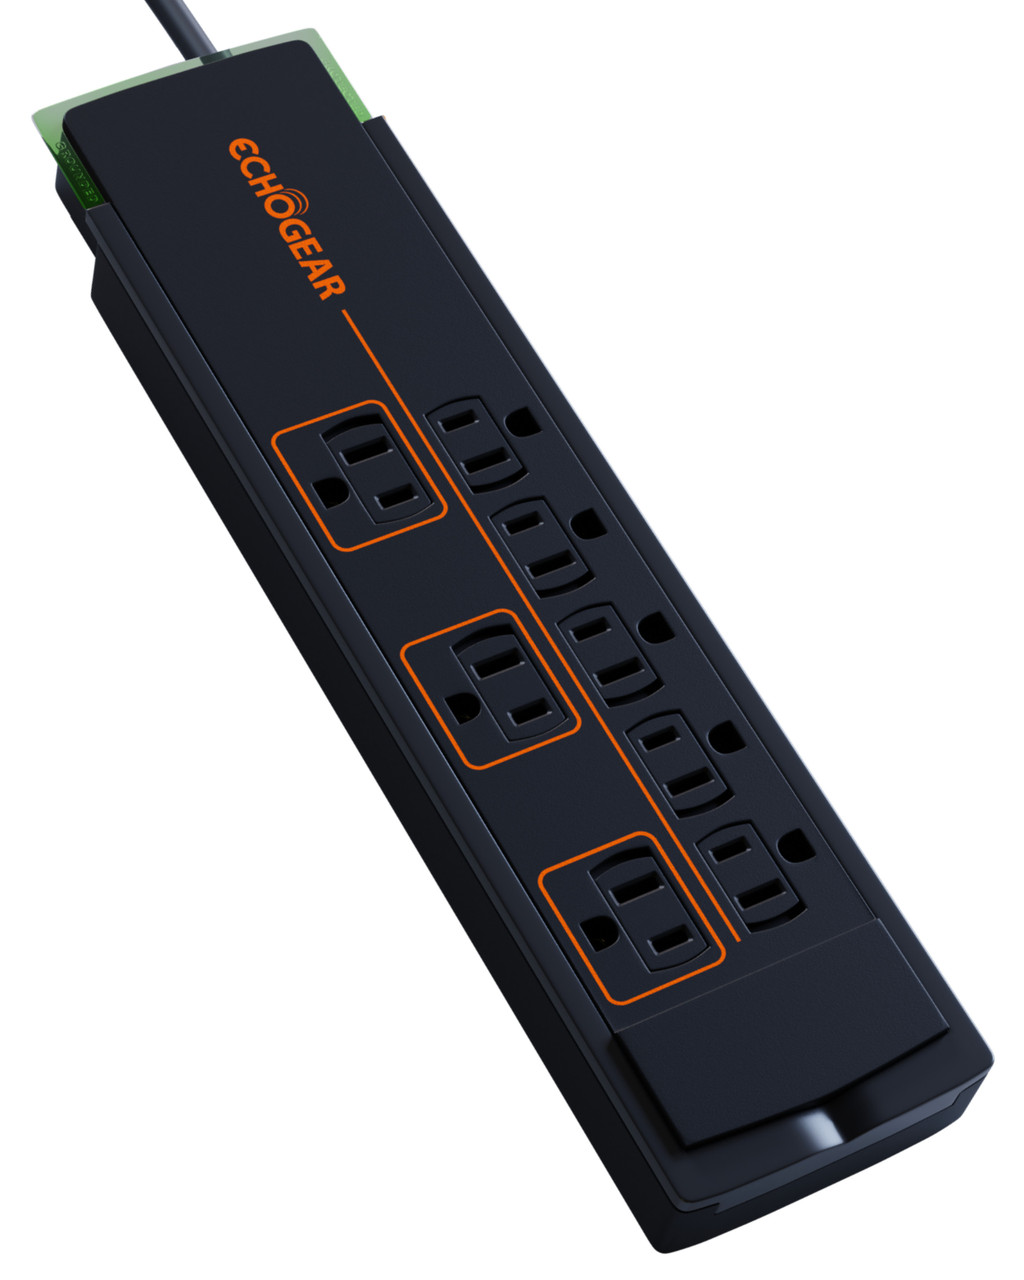 Low Profile Surge Protector Power Strip With Heavy Duty Surge Protection